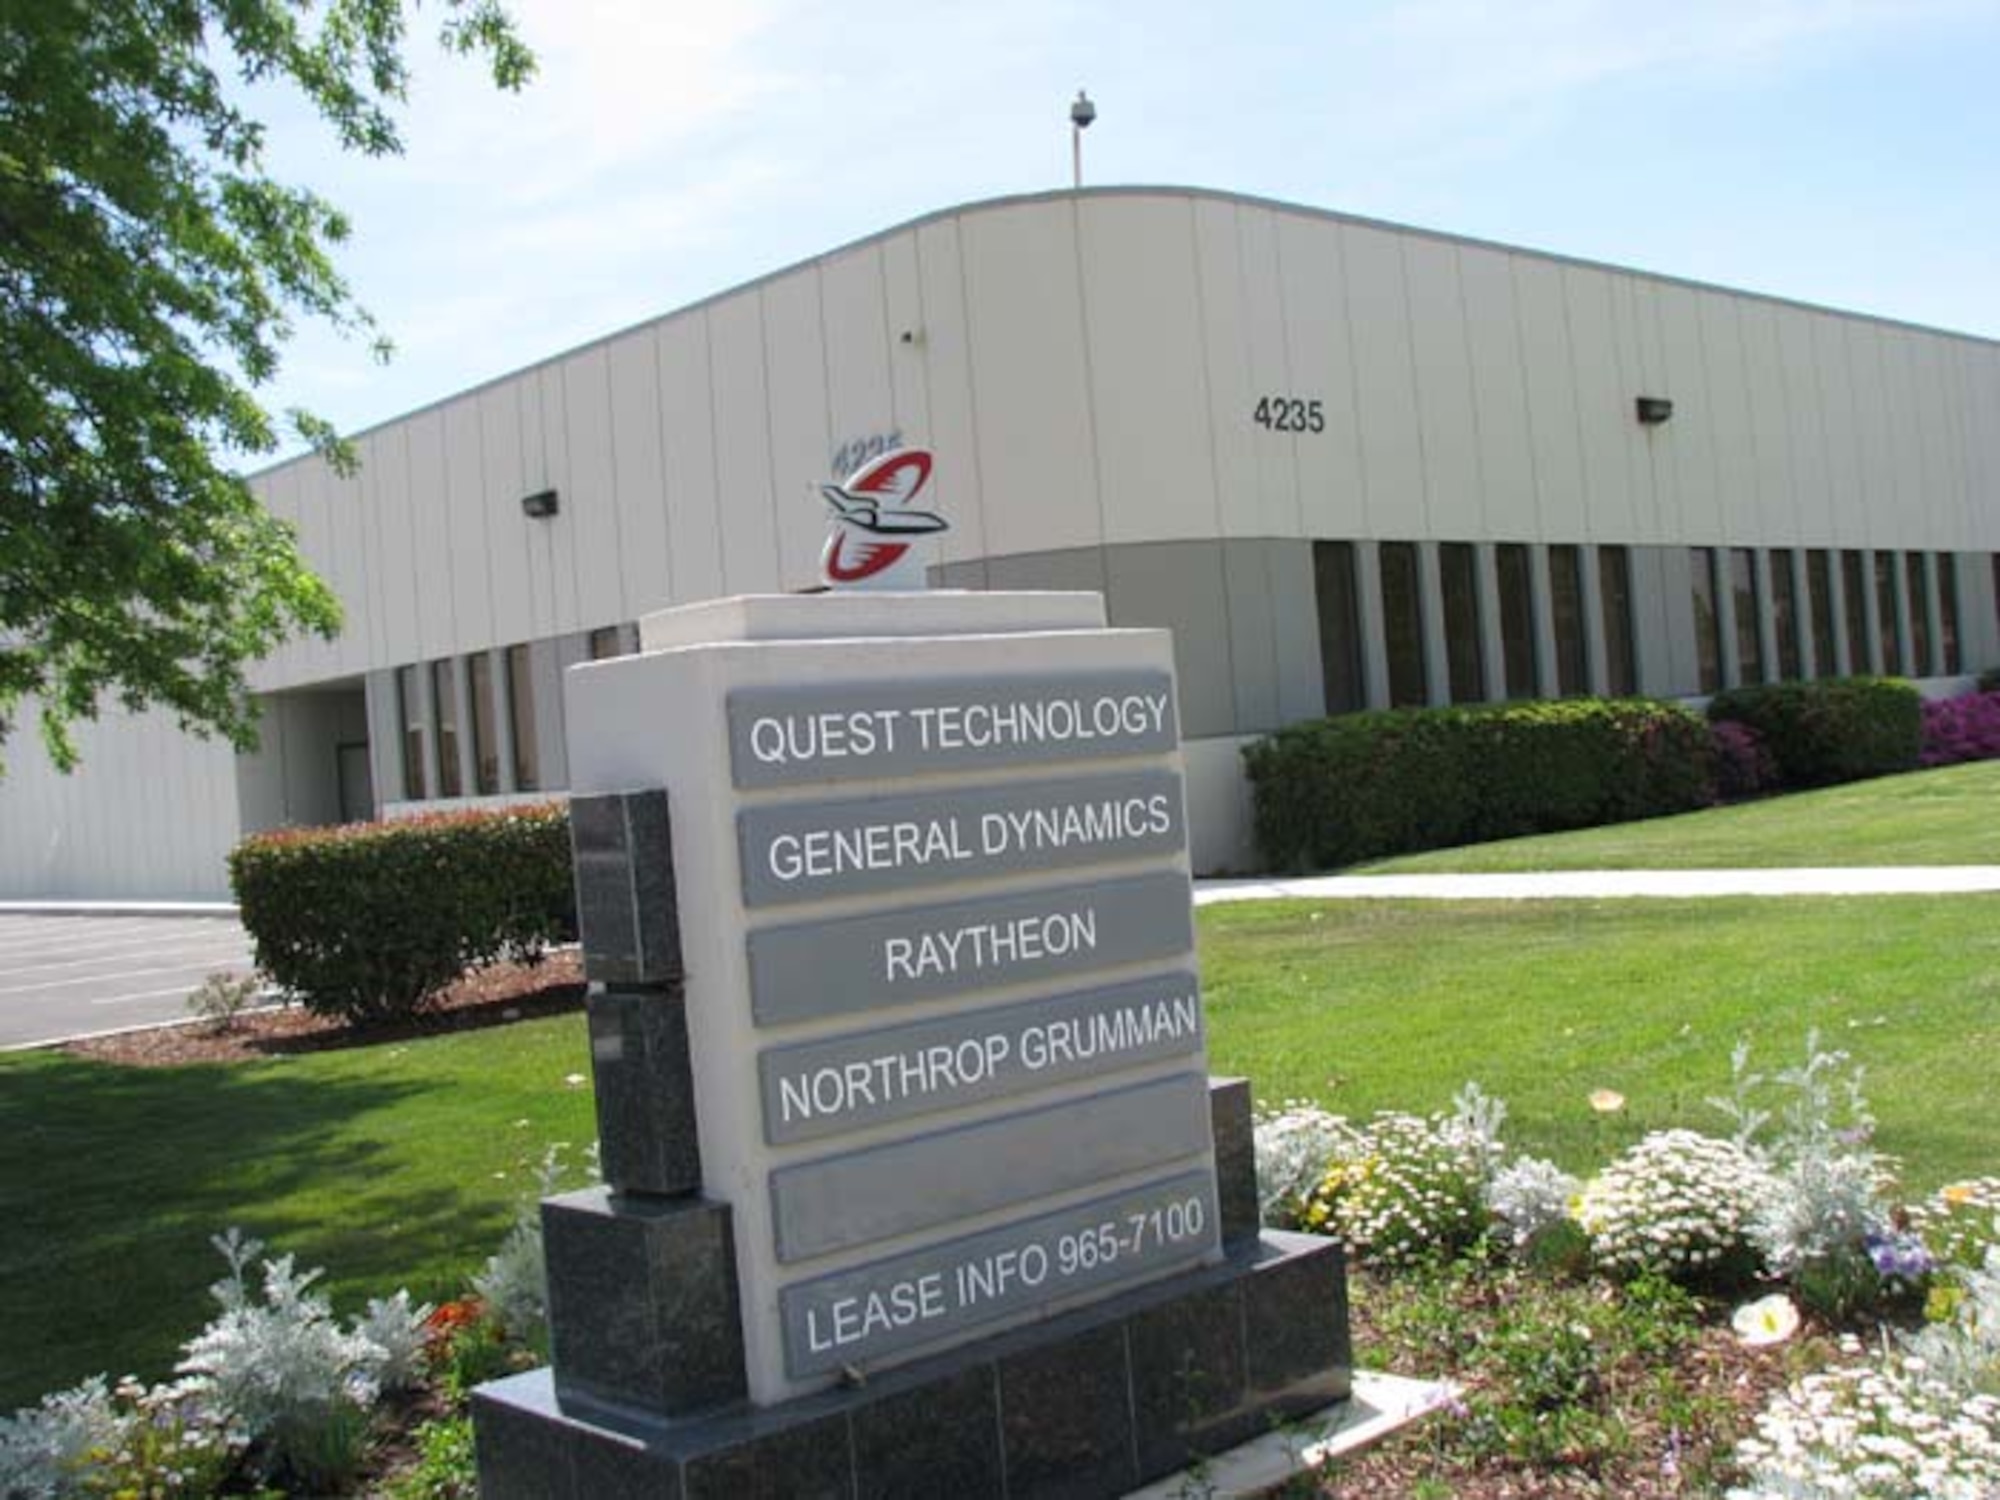 Quest expanded by 10,000 square feet this month, adding more room for its growing technology management business at the former McClellan Air Force Base. (photo by Susan Wolbarst)
